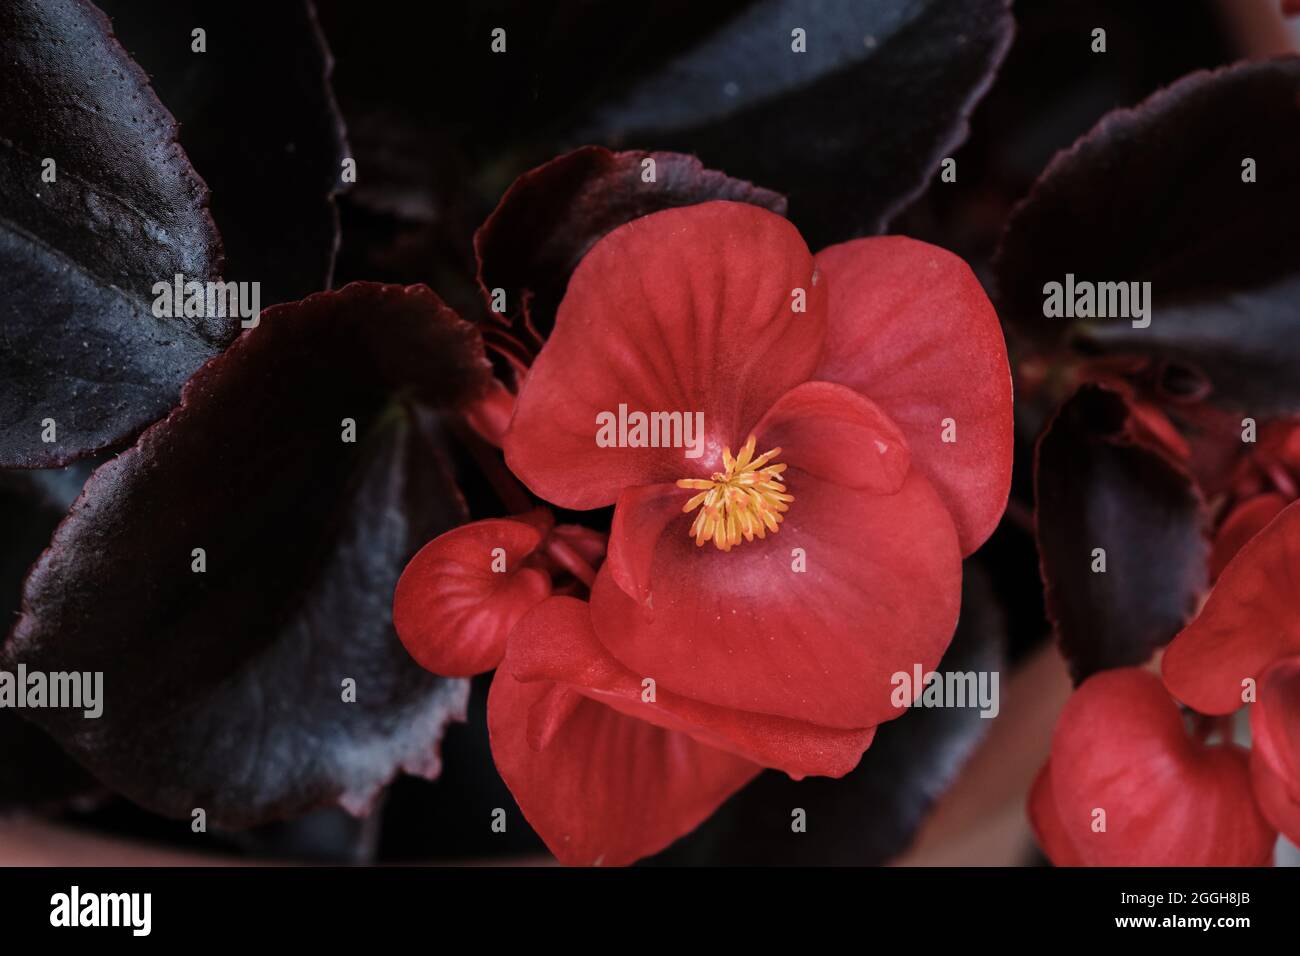 Begonia cucullata known as wax begonia red blooming flowers Stock Photo